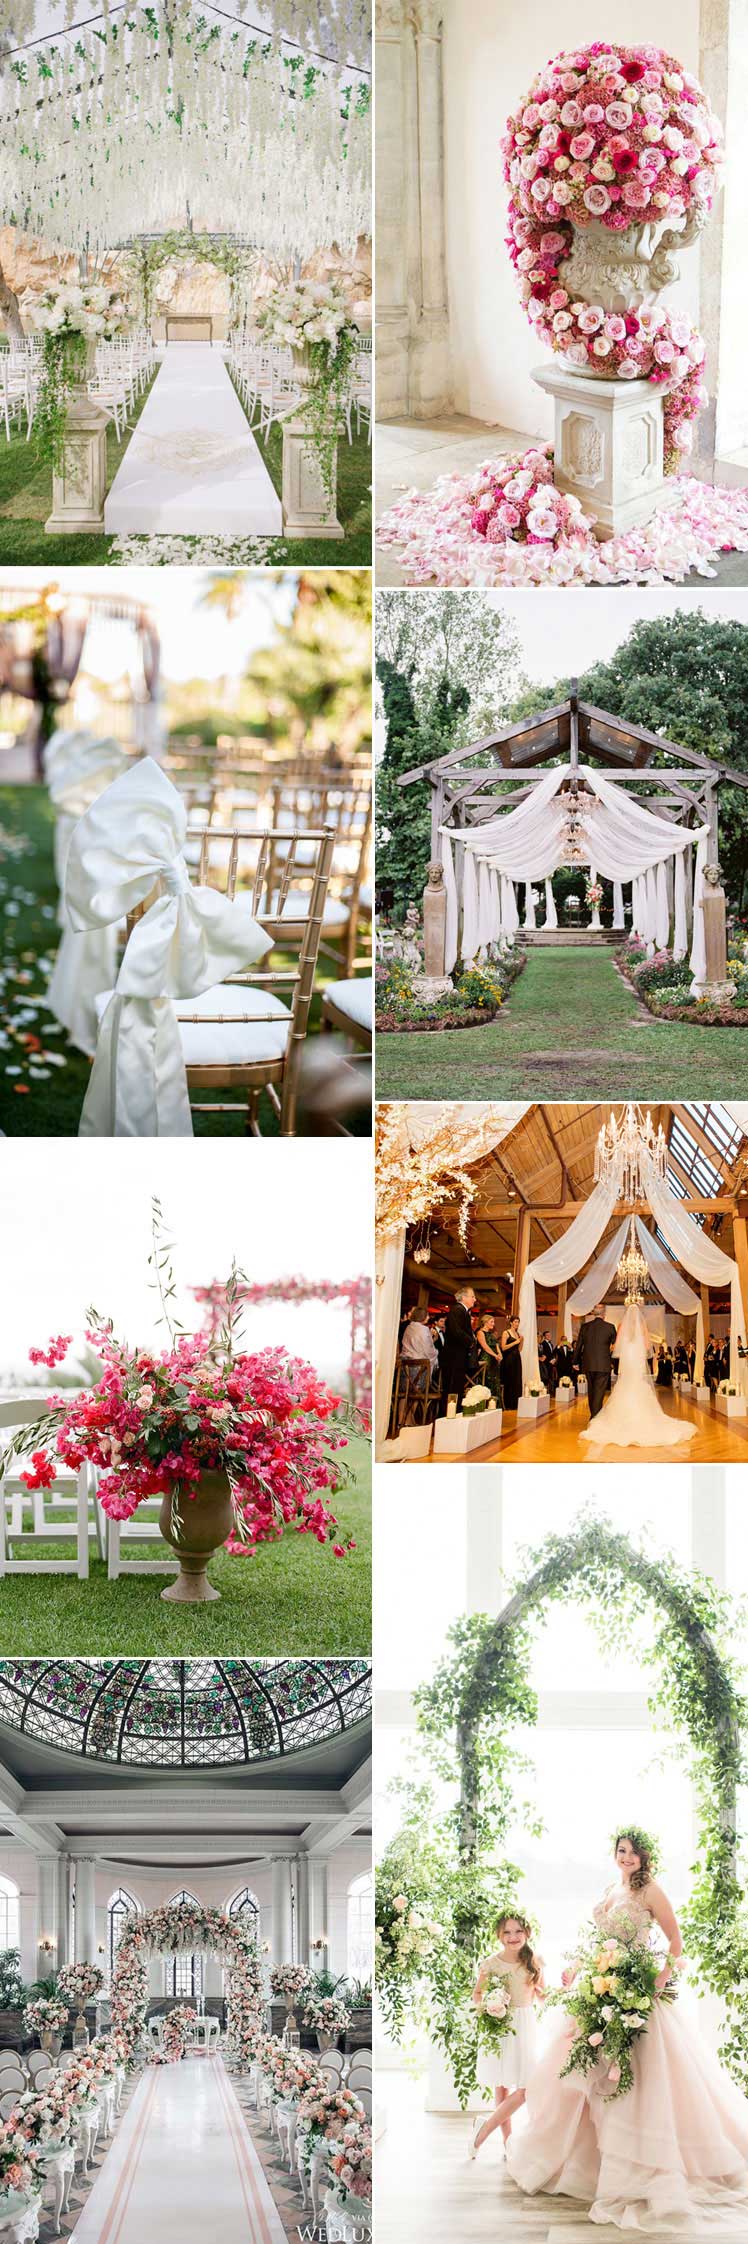 Lavish wedding aisles for a dramatic special day